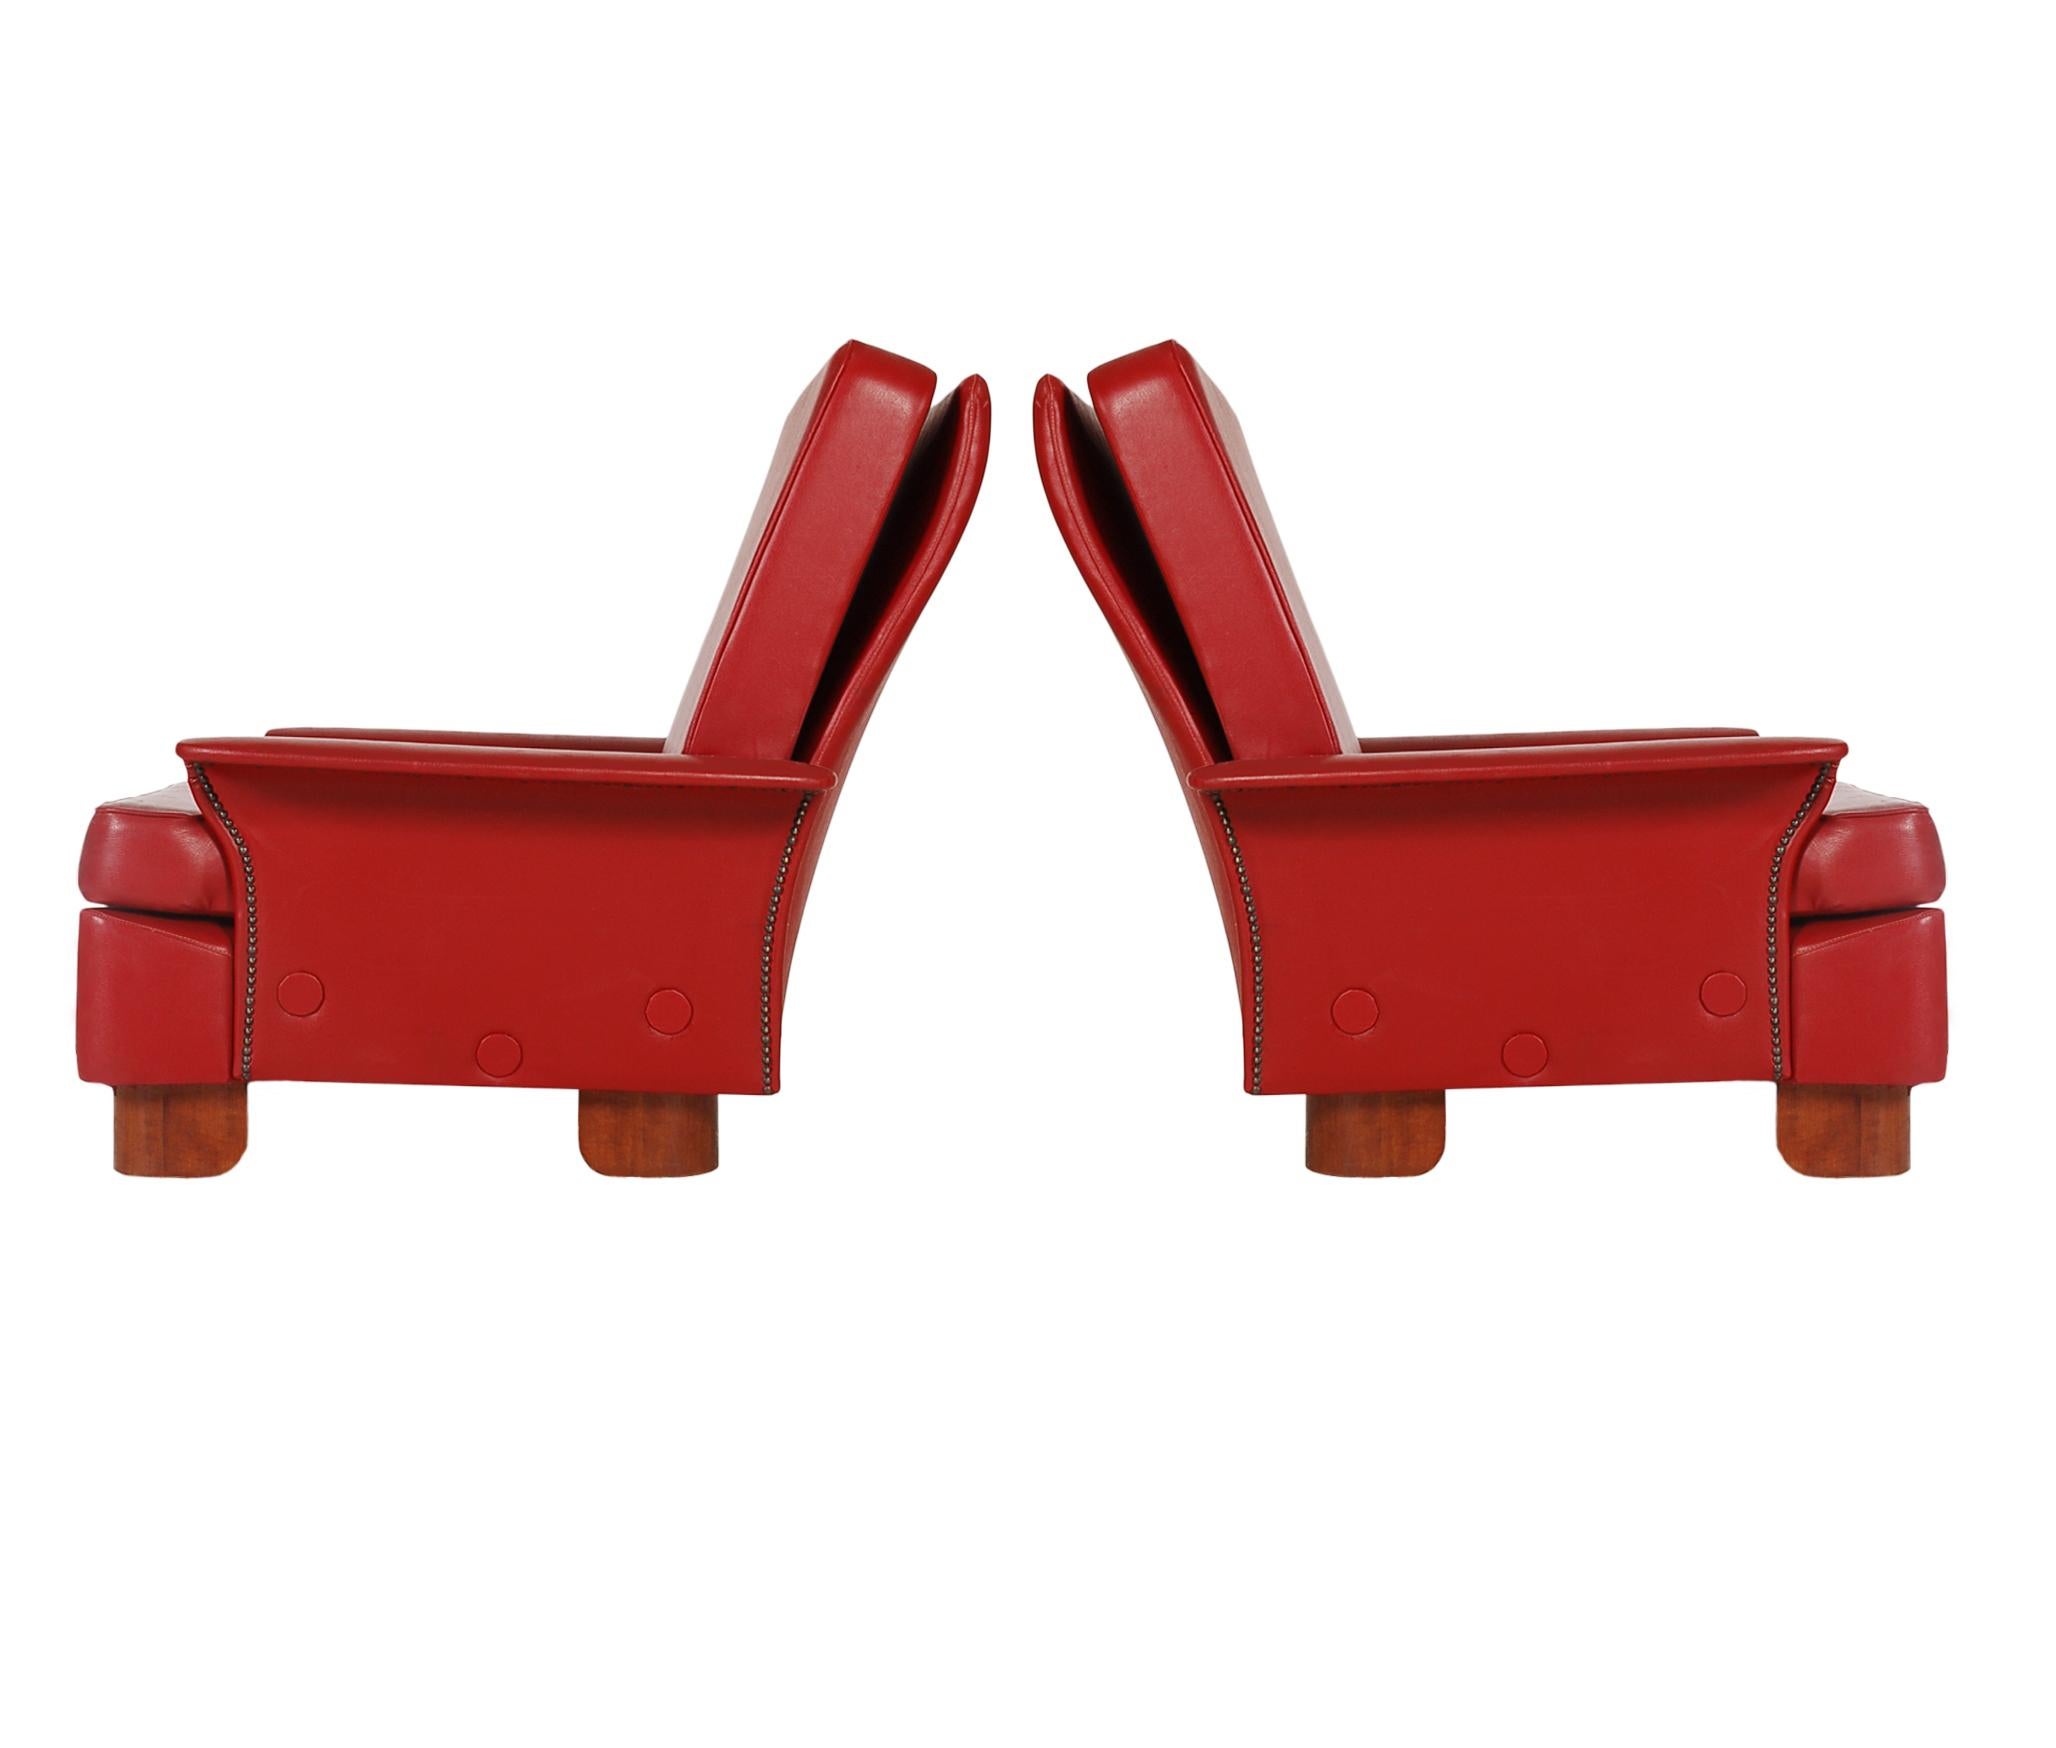 Pair of Midcentury Italian Modern Art Deco Lounge or Club Chairs in Red For Sale 2